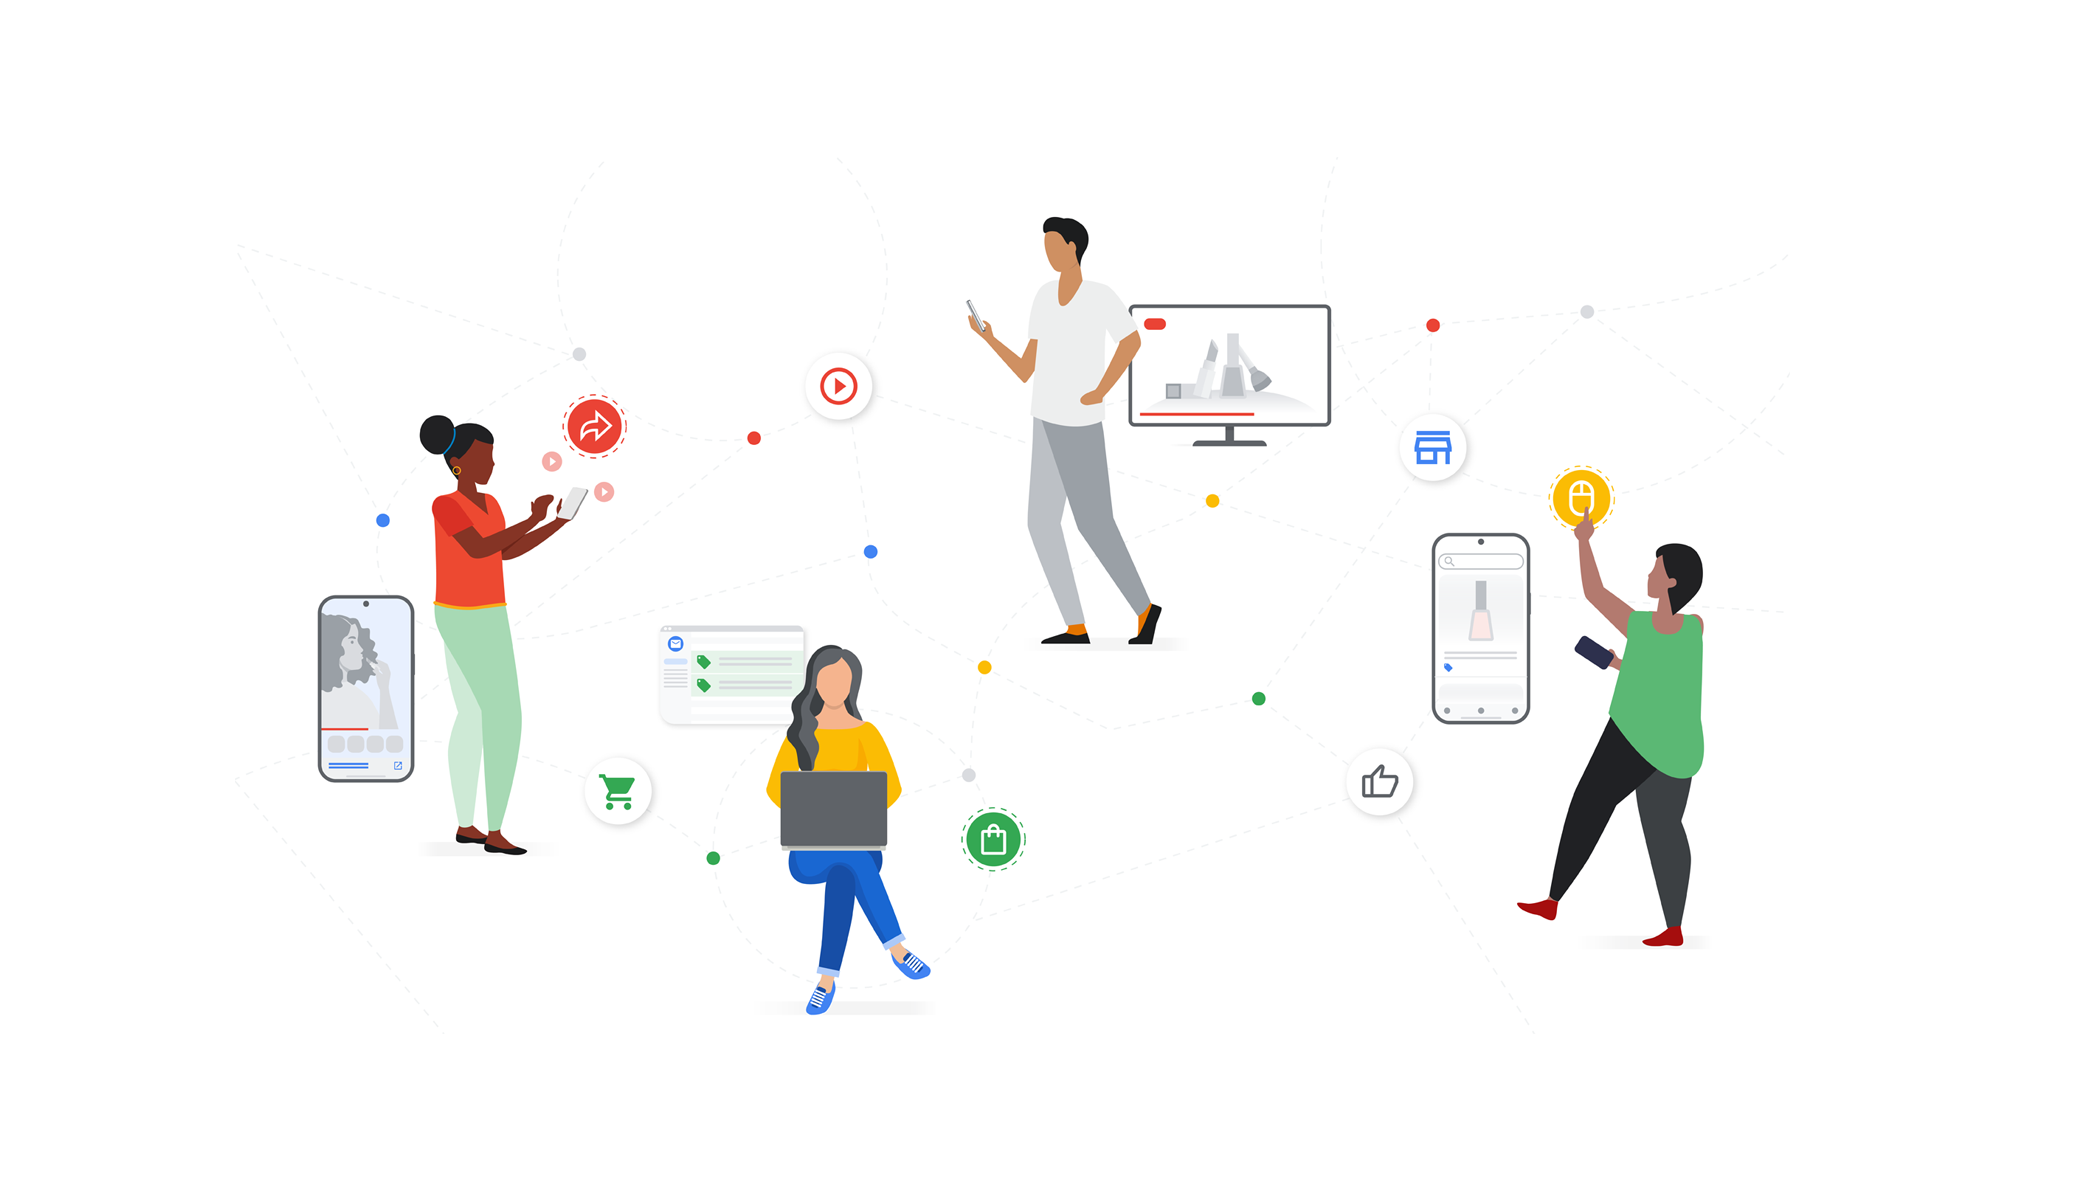 Google AI-powered Demand Gen campaigns multiply creativity and generate demand.